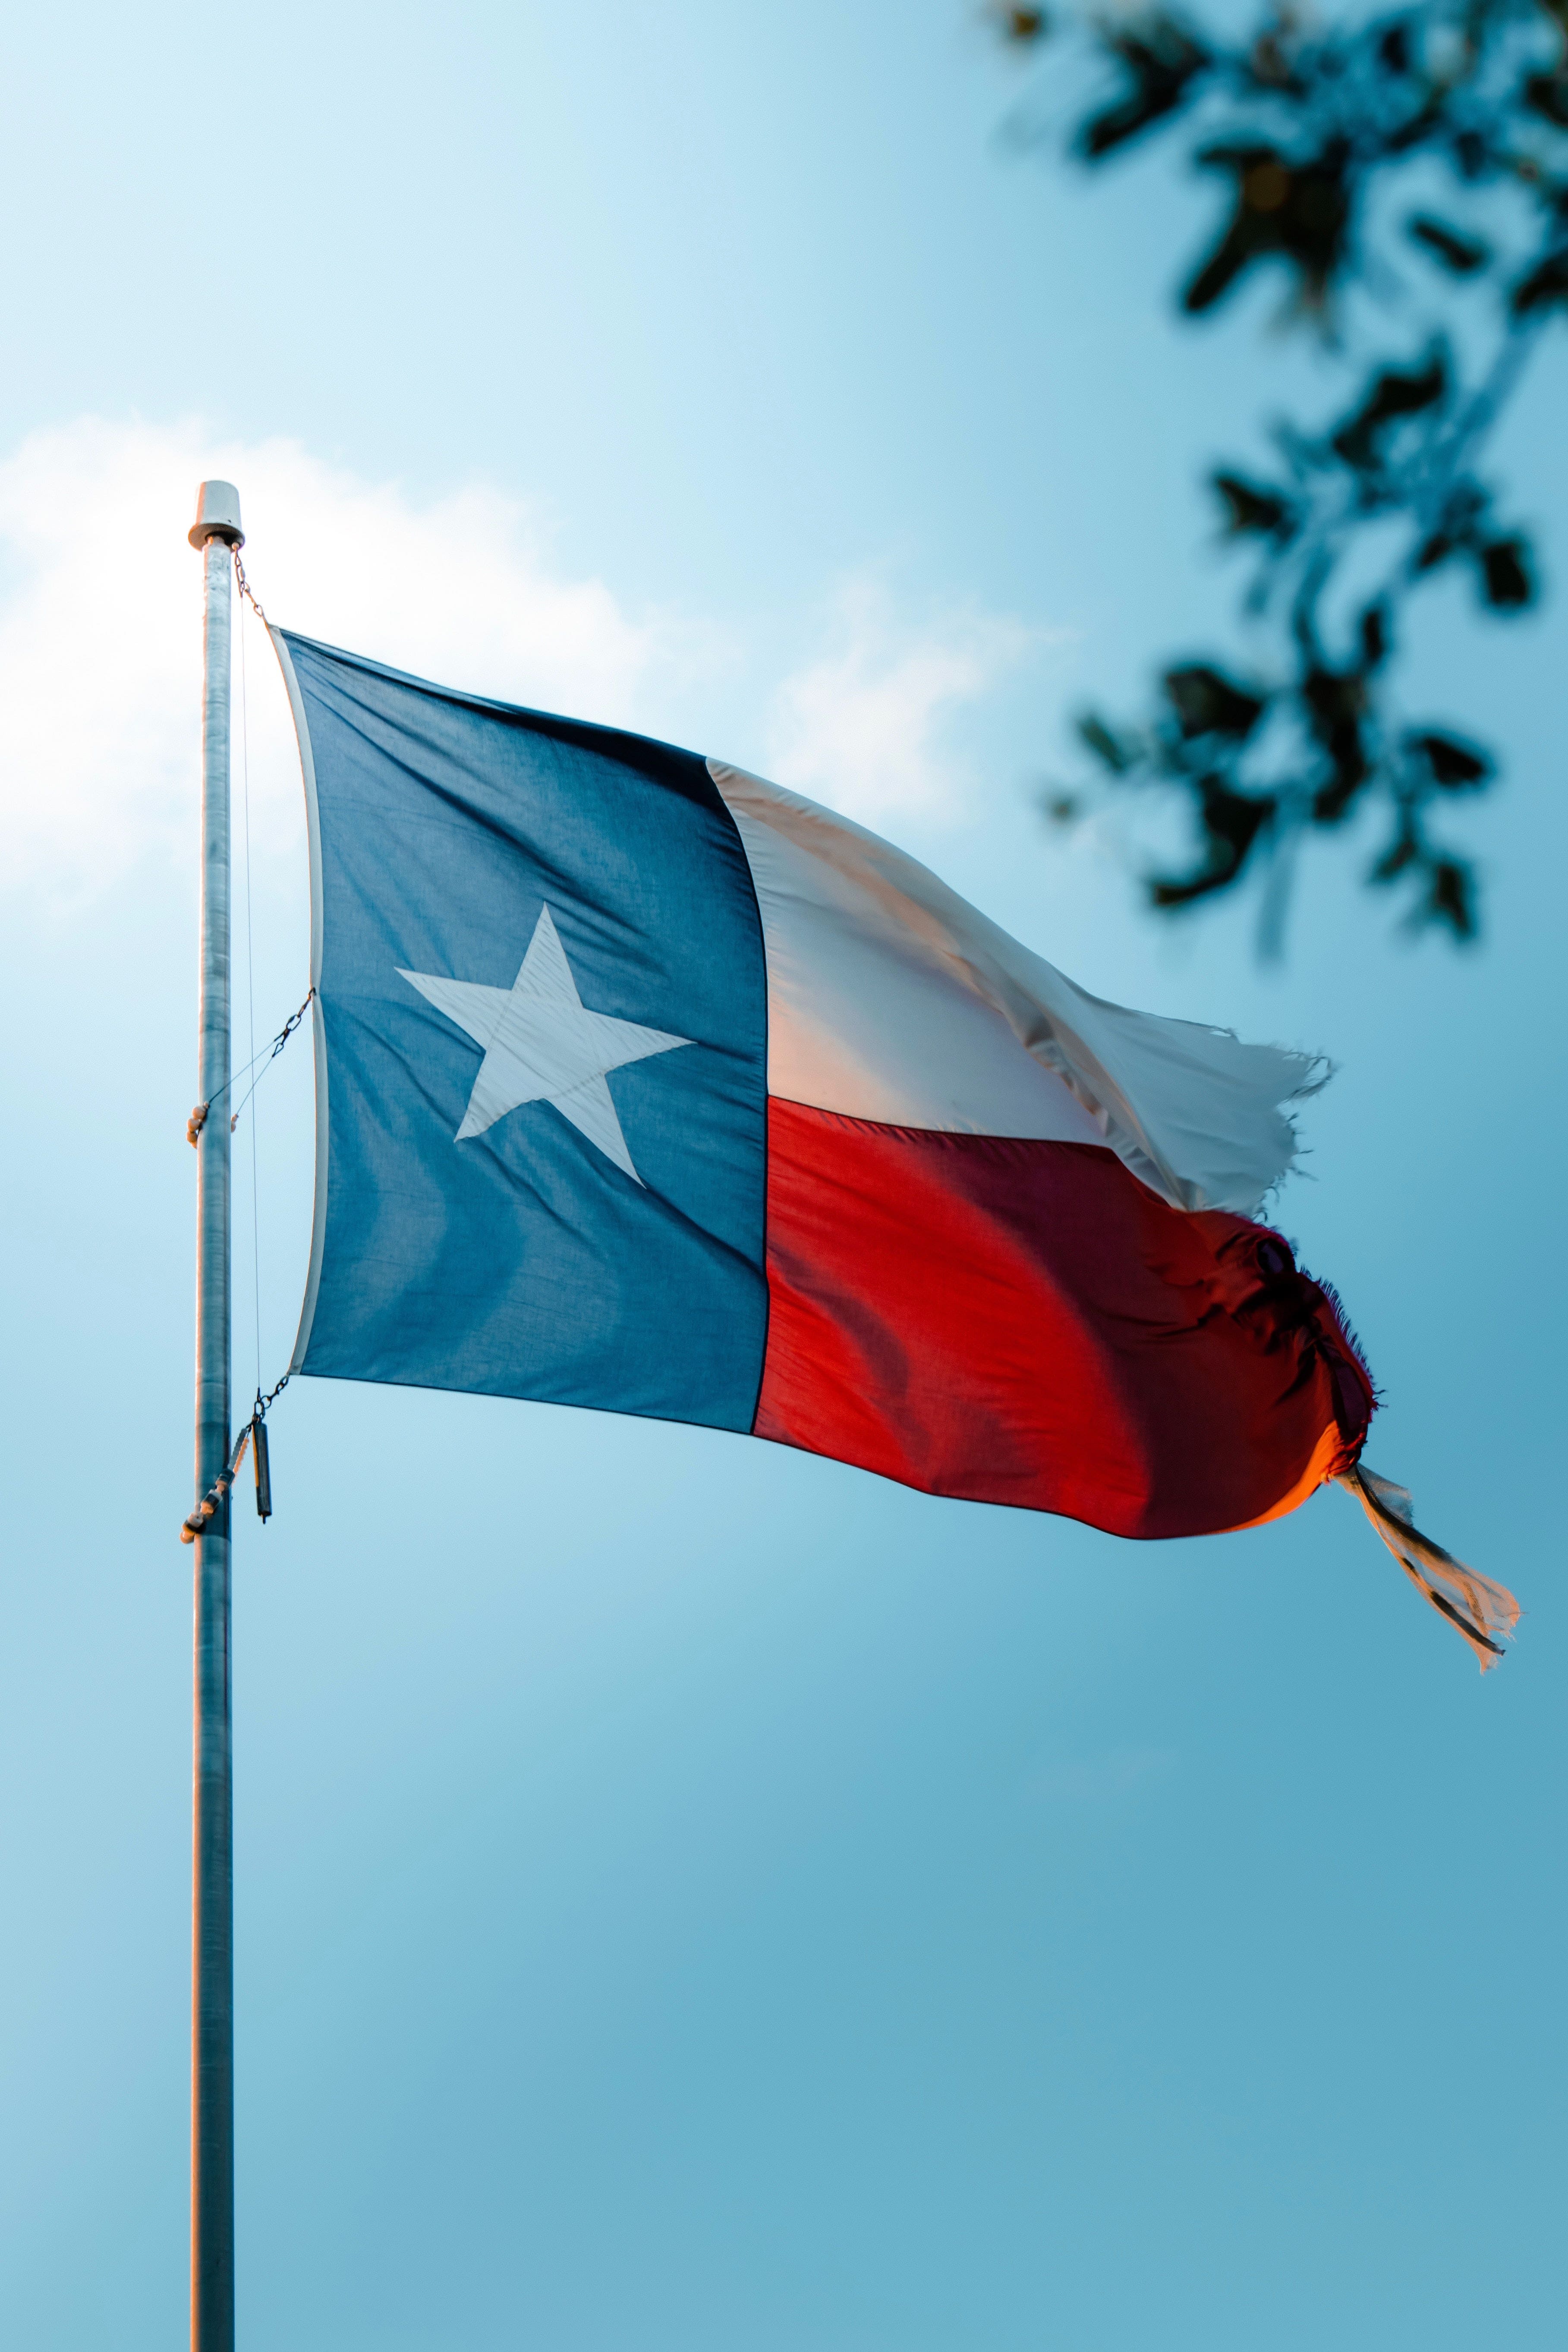 Texas Legislature Approves Psychedelics Research Bill, Will Now Head To Governor's Desk